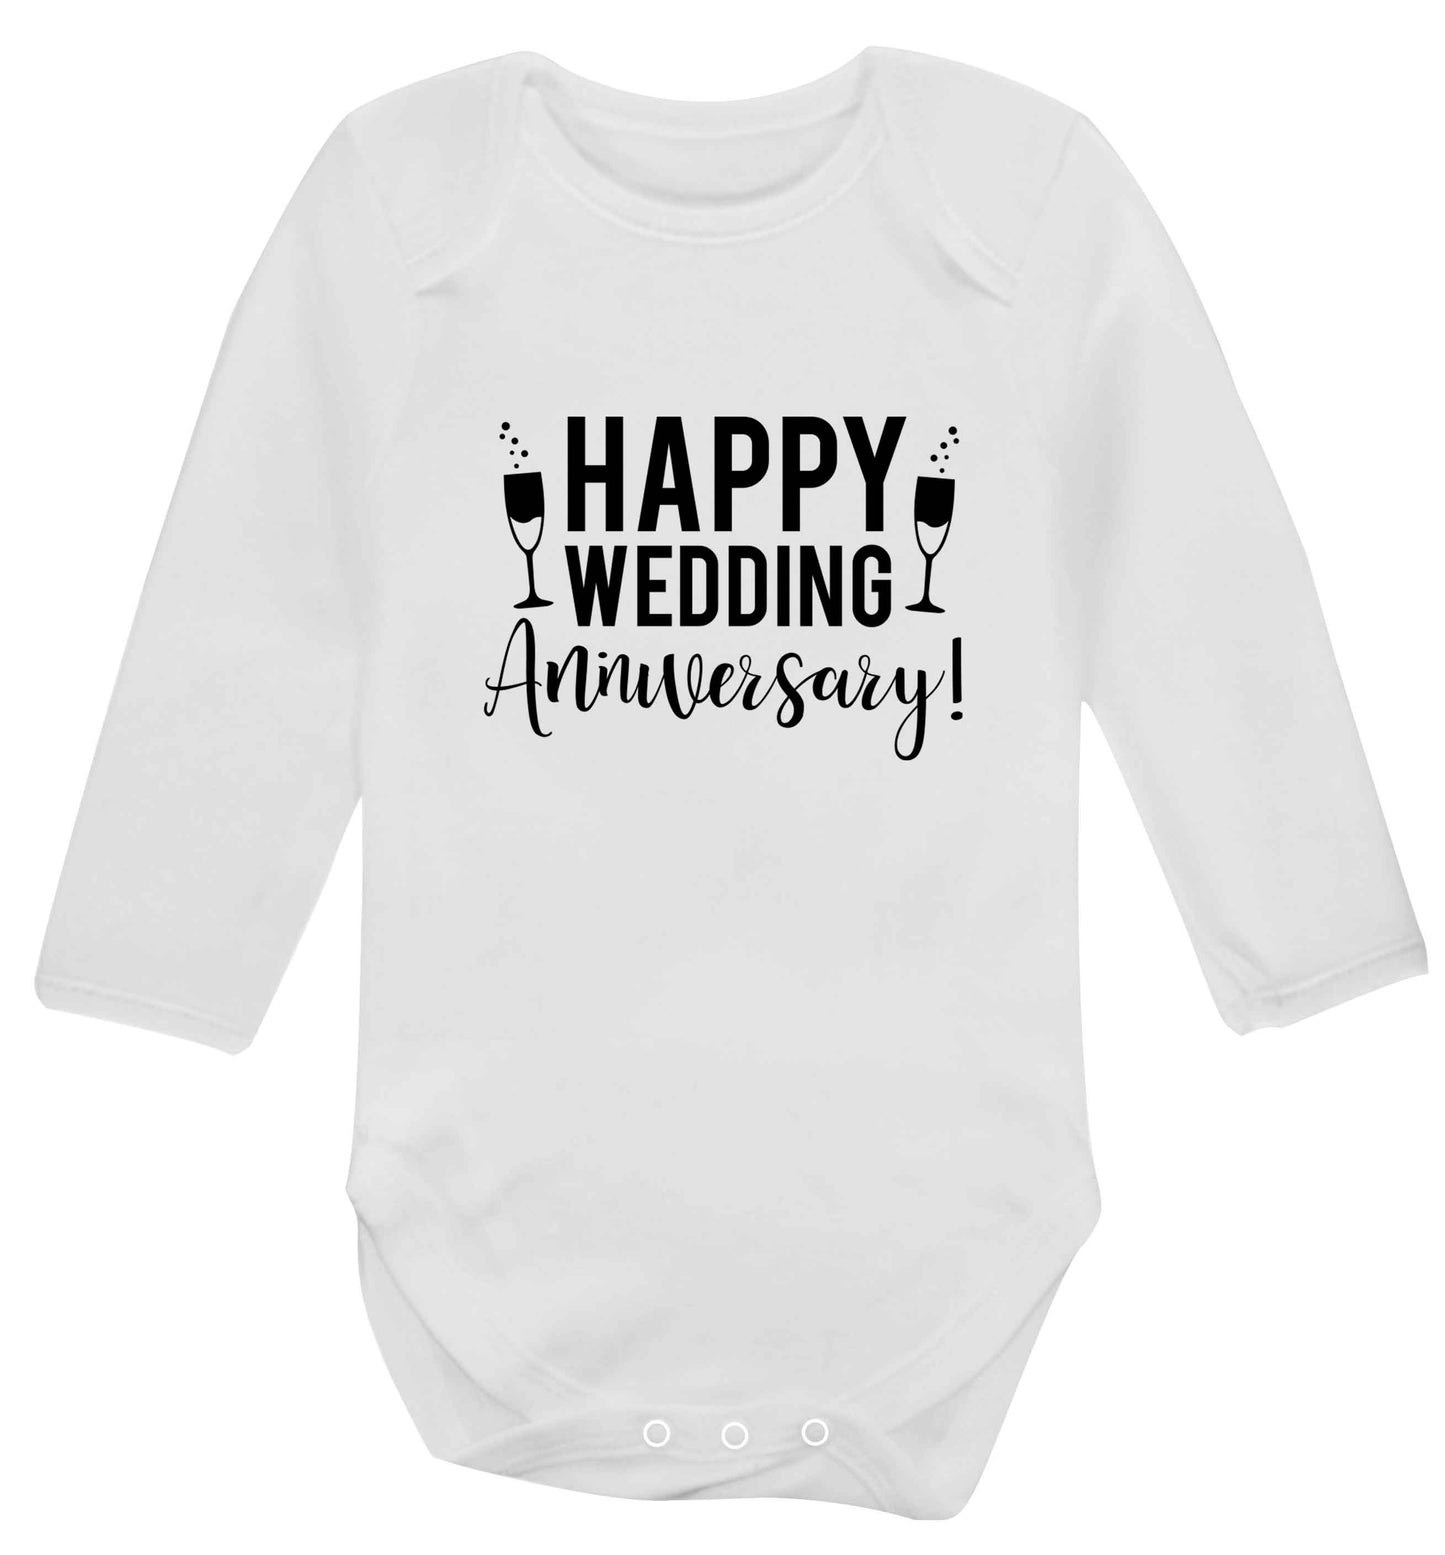 Happy wedding anniversary! baby vest long sleeved white 6-12 months